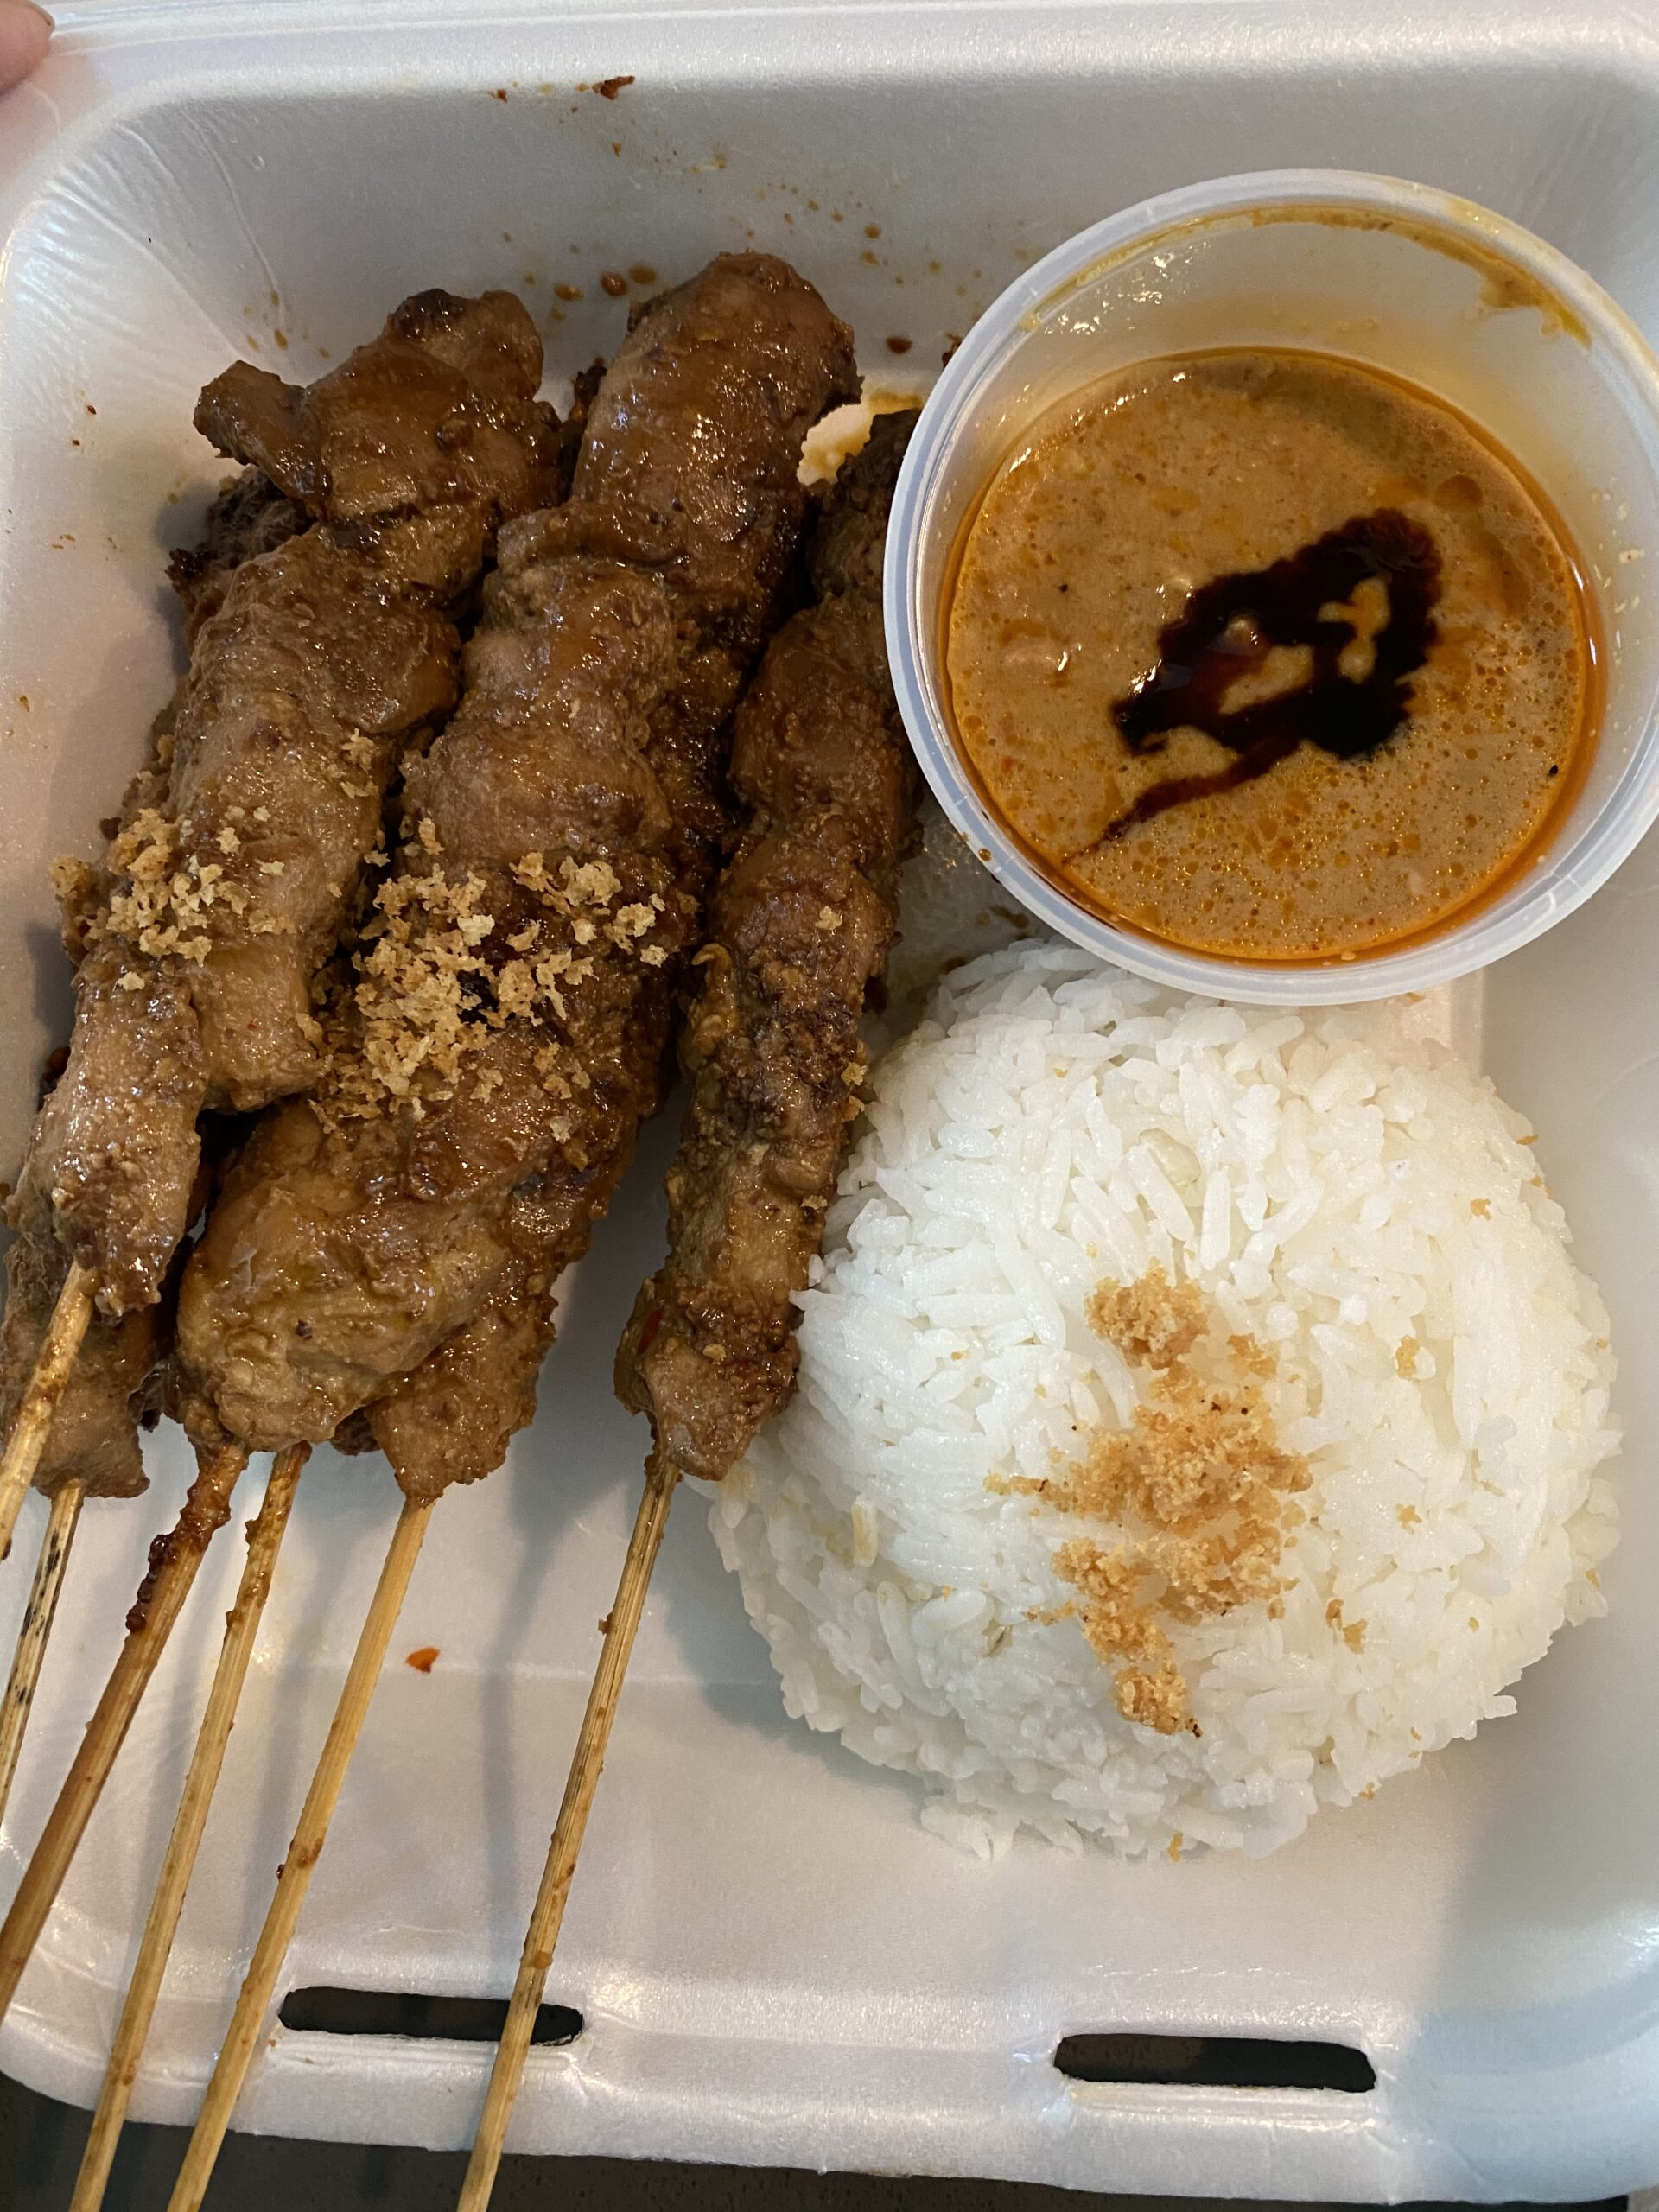 Indonesian Sate Ayam - Chicken Skewers (HALAL). ( $ for a Cause or TRADE ) - Galora